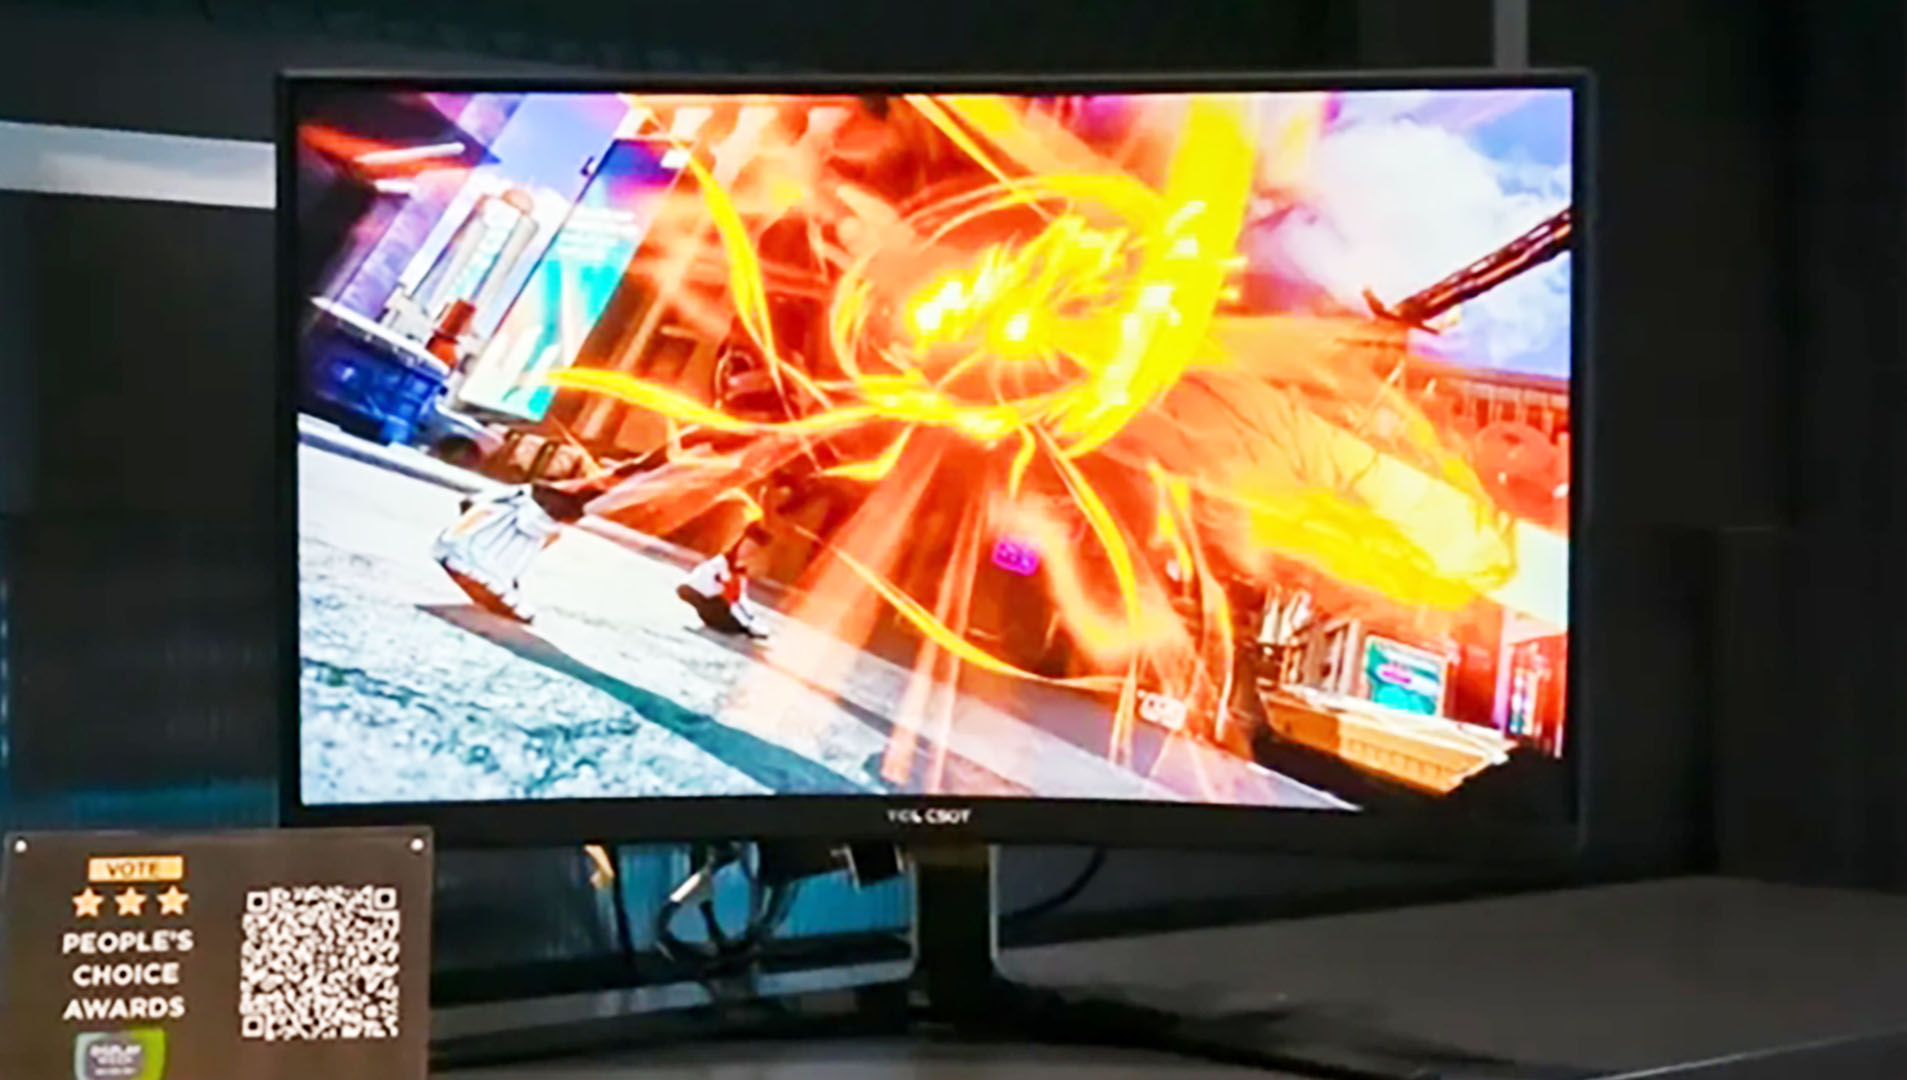 This 4K gaming monitor features a 1000Hz refresh rate (yes, 1000Hz)